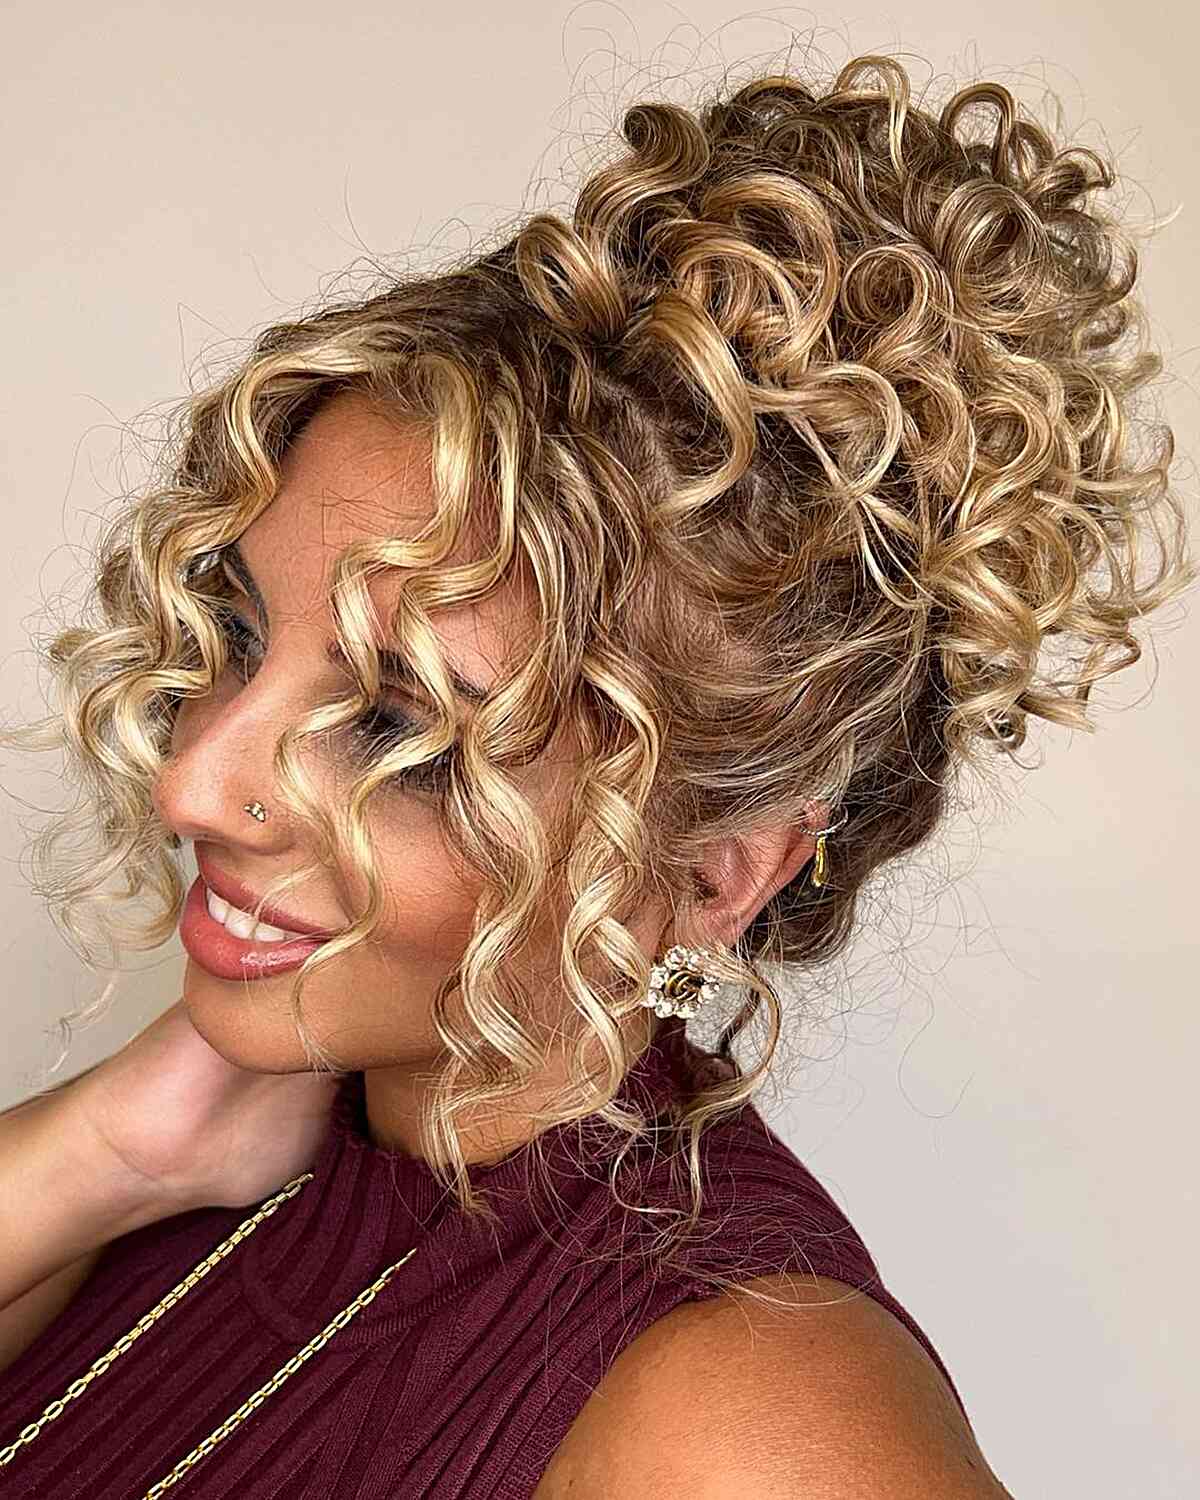 15 Stunning Curly Prom Hairstyles for 2023 - Updos, Down Do's & Braids!